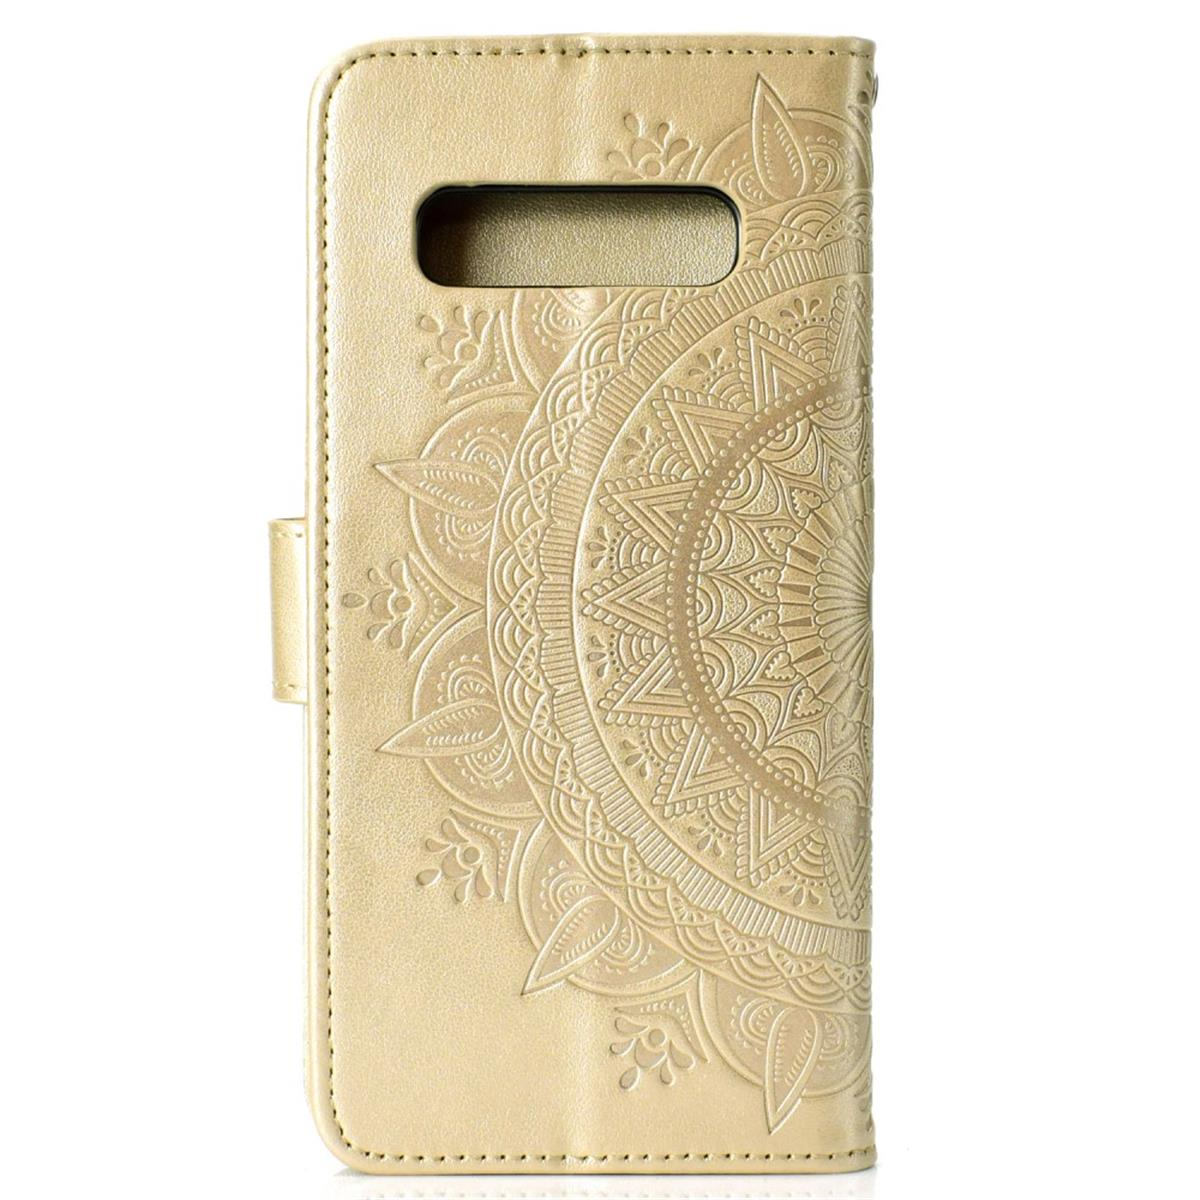 COVERKINGZ Klapphülle mit Mandala Muster, Samsung, S10+ Bookcover, Galaxy Gold [Plus